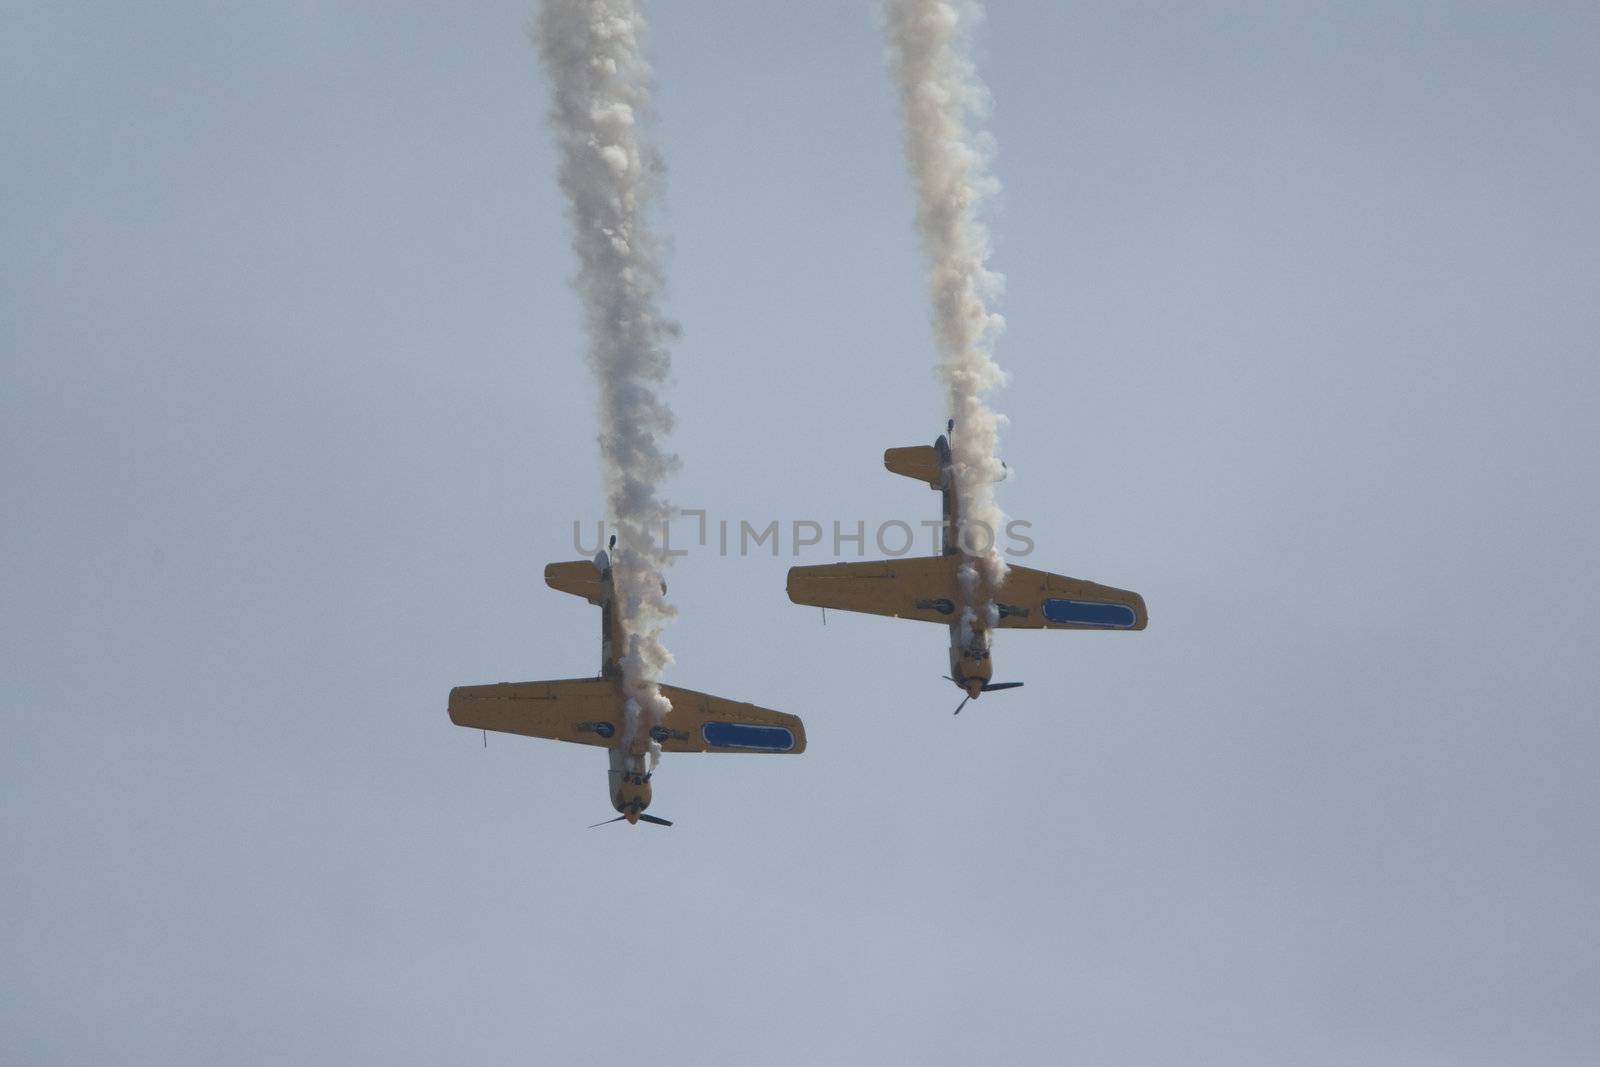 Acrobatic airplanes perform during the airshow on July 17, 2010 on Henri Coanda airport, Bucharest, Romania.